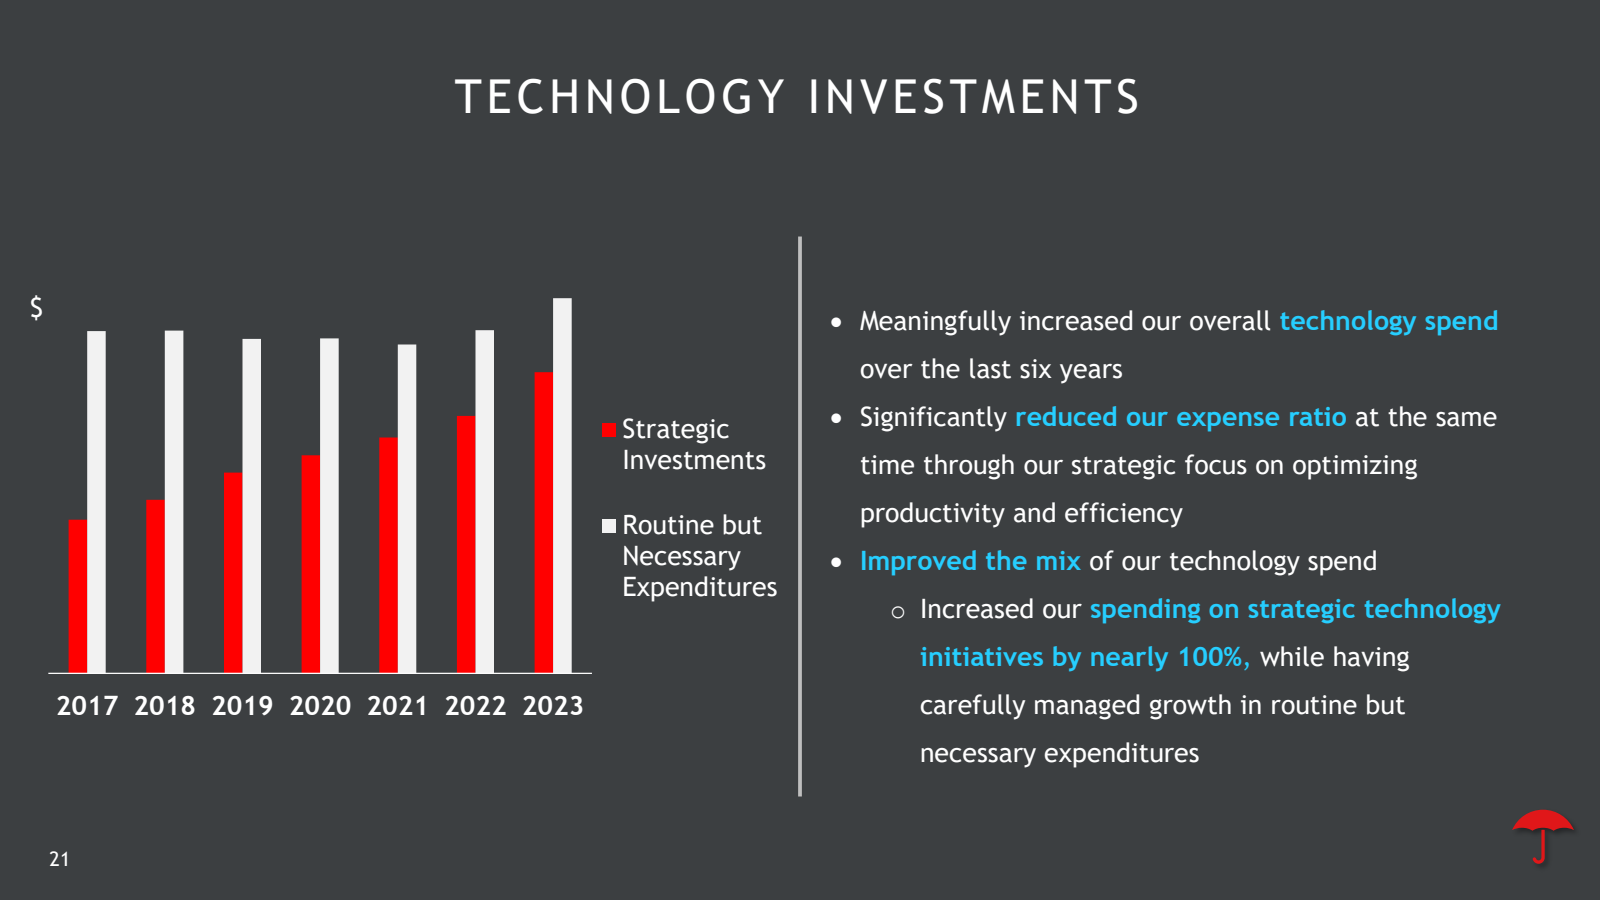 $ 

TECHNOLOGY INVES